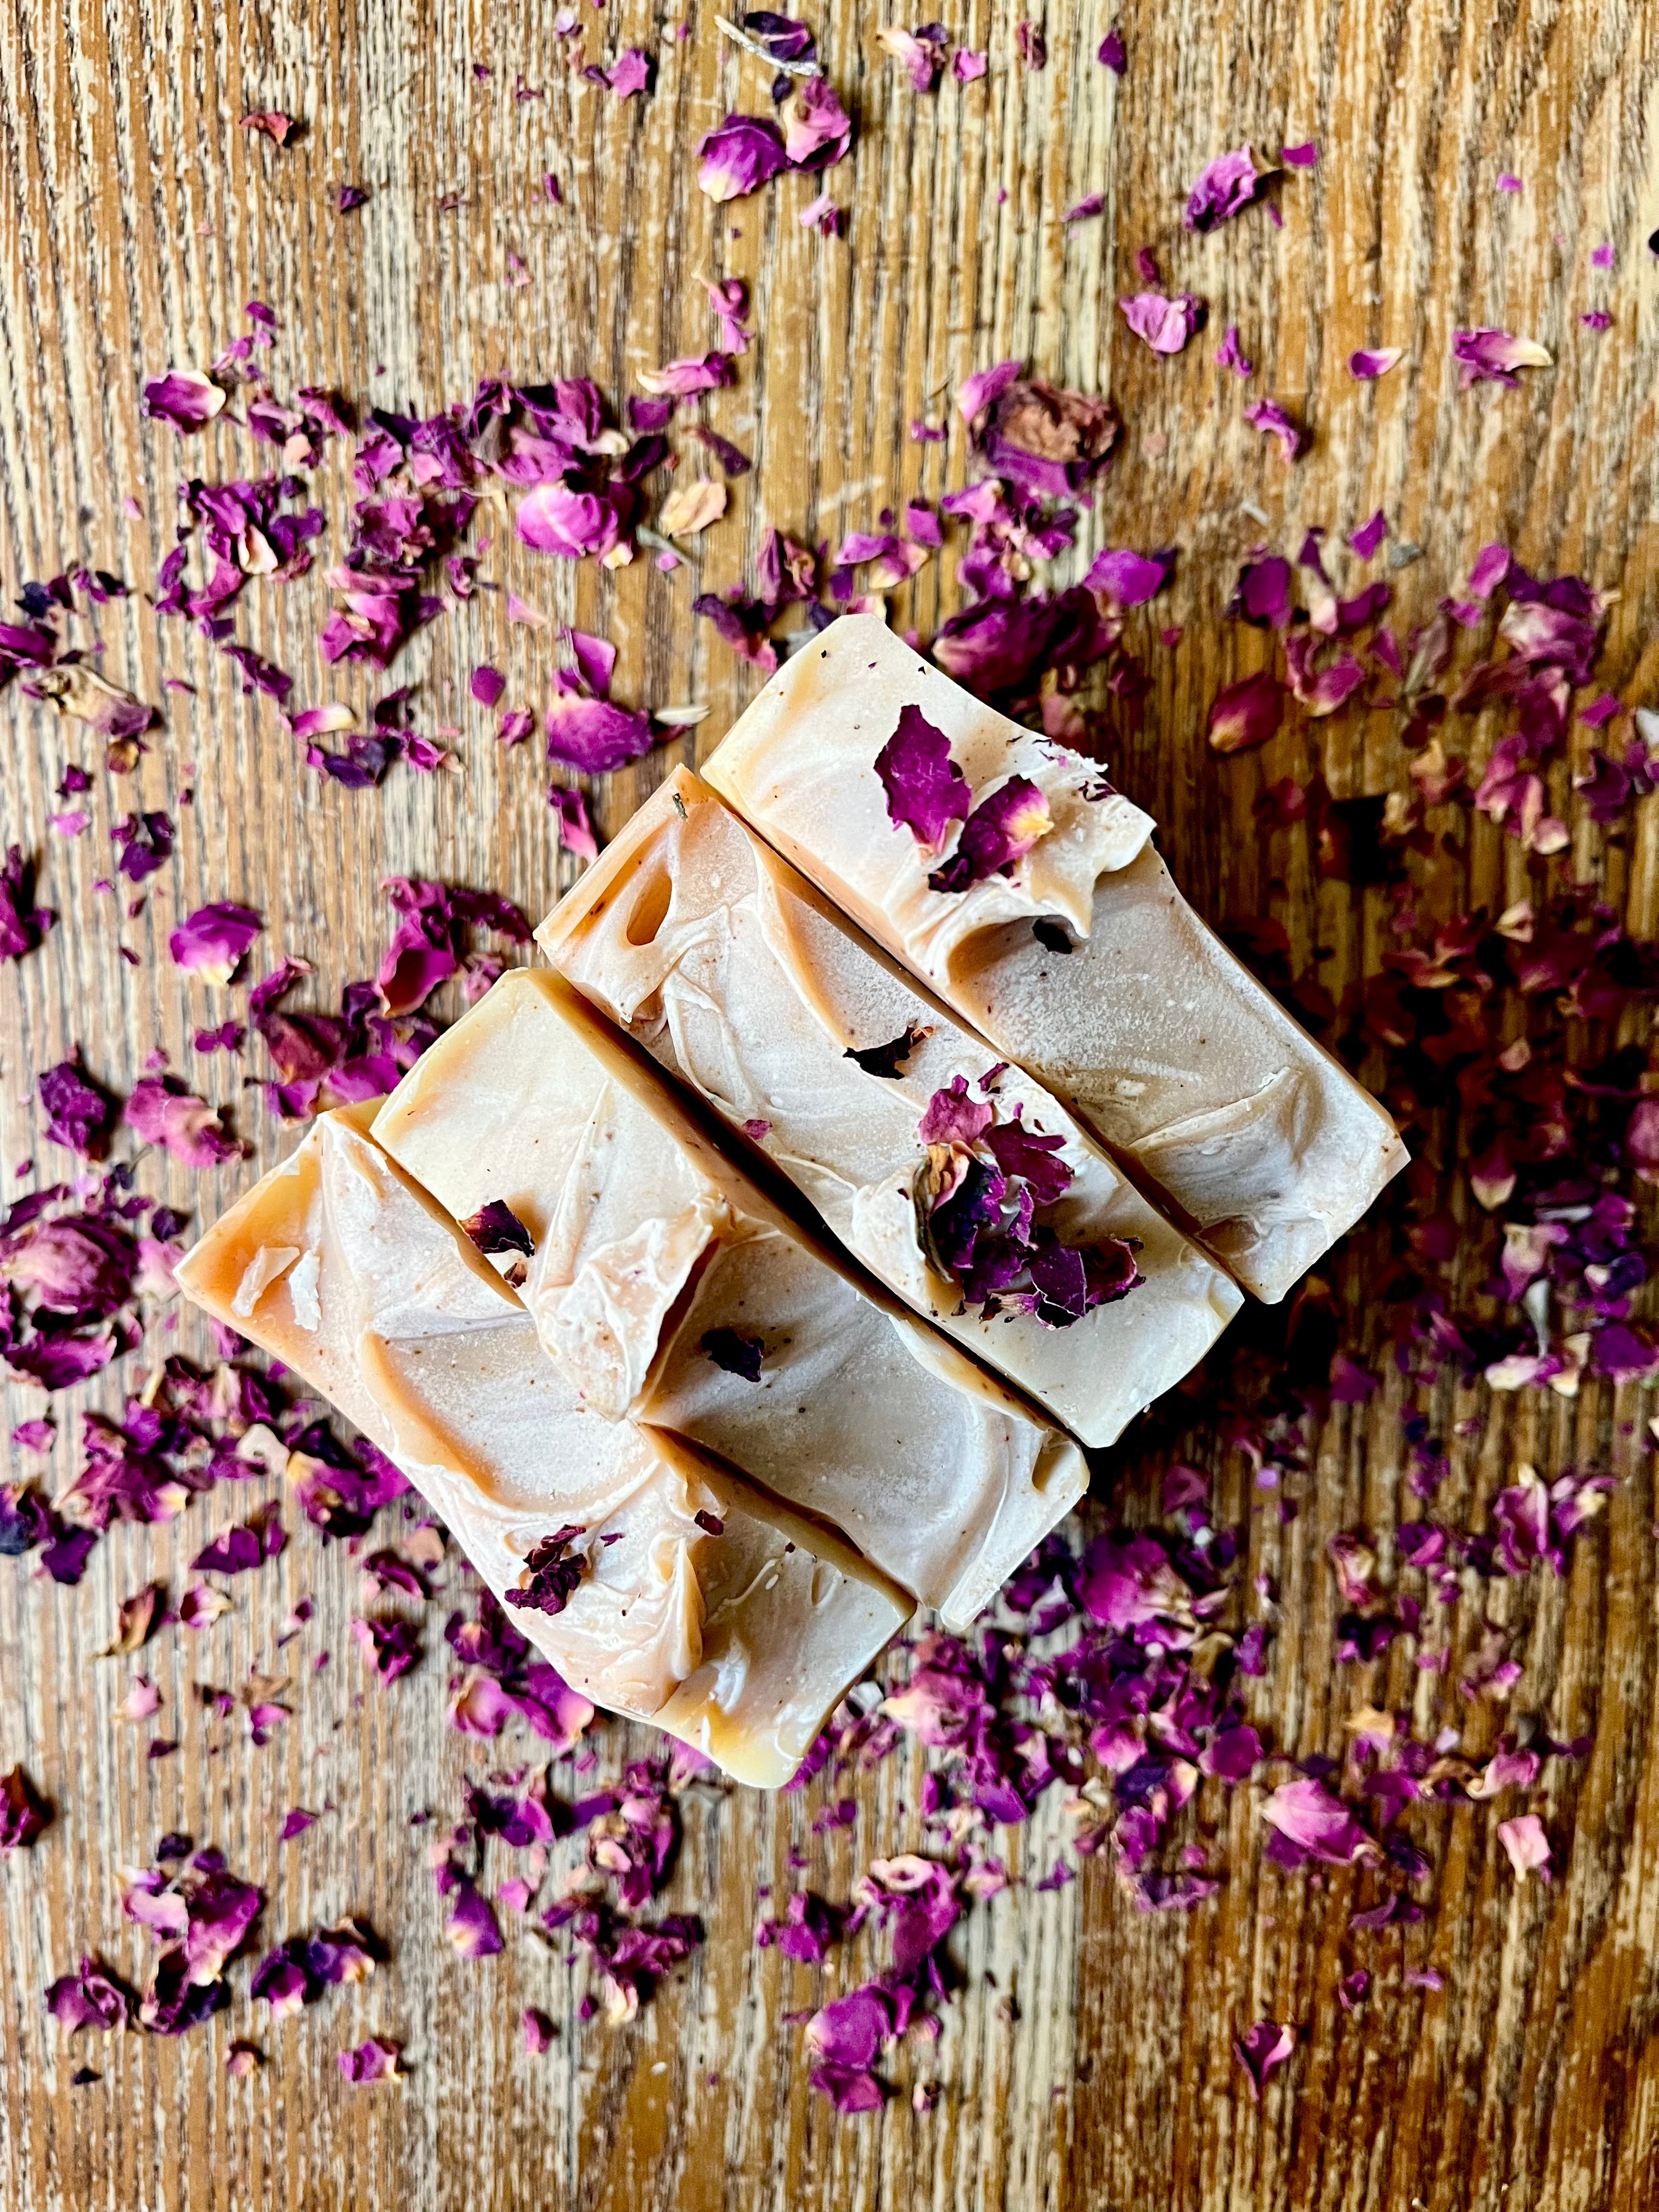 Natural, vegan bar soaps made with nourishing ingredients, organic coconut milk, and organic roses. Great as a face and body soap for all skin types.